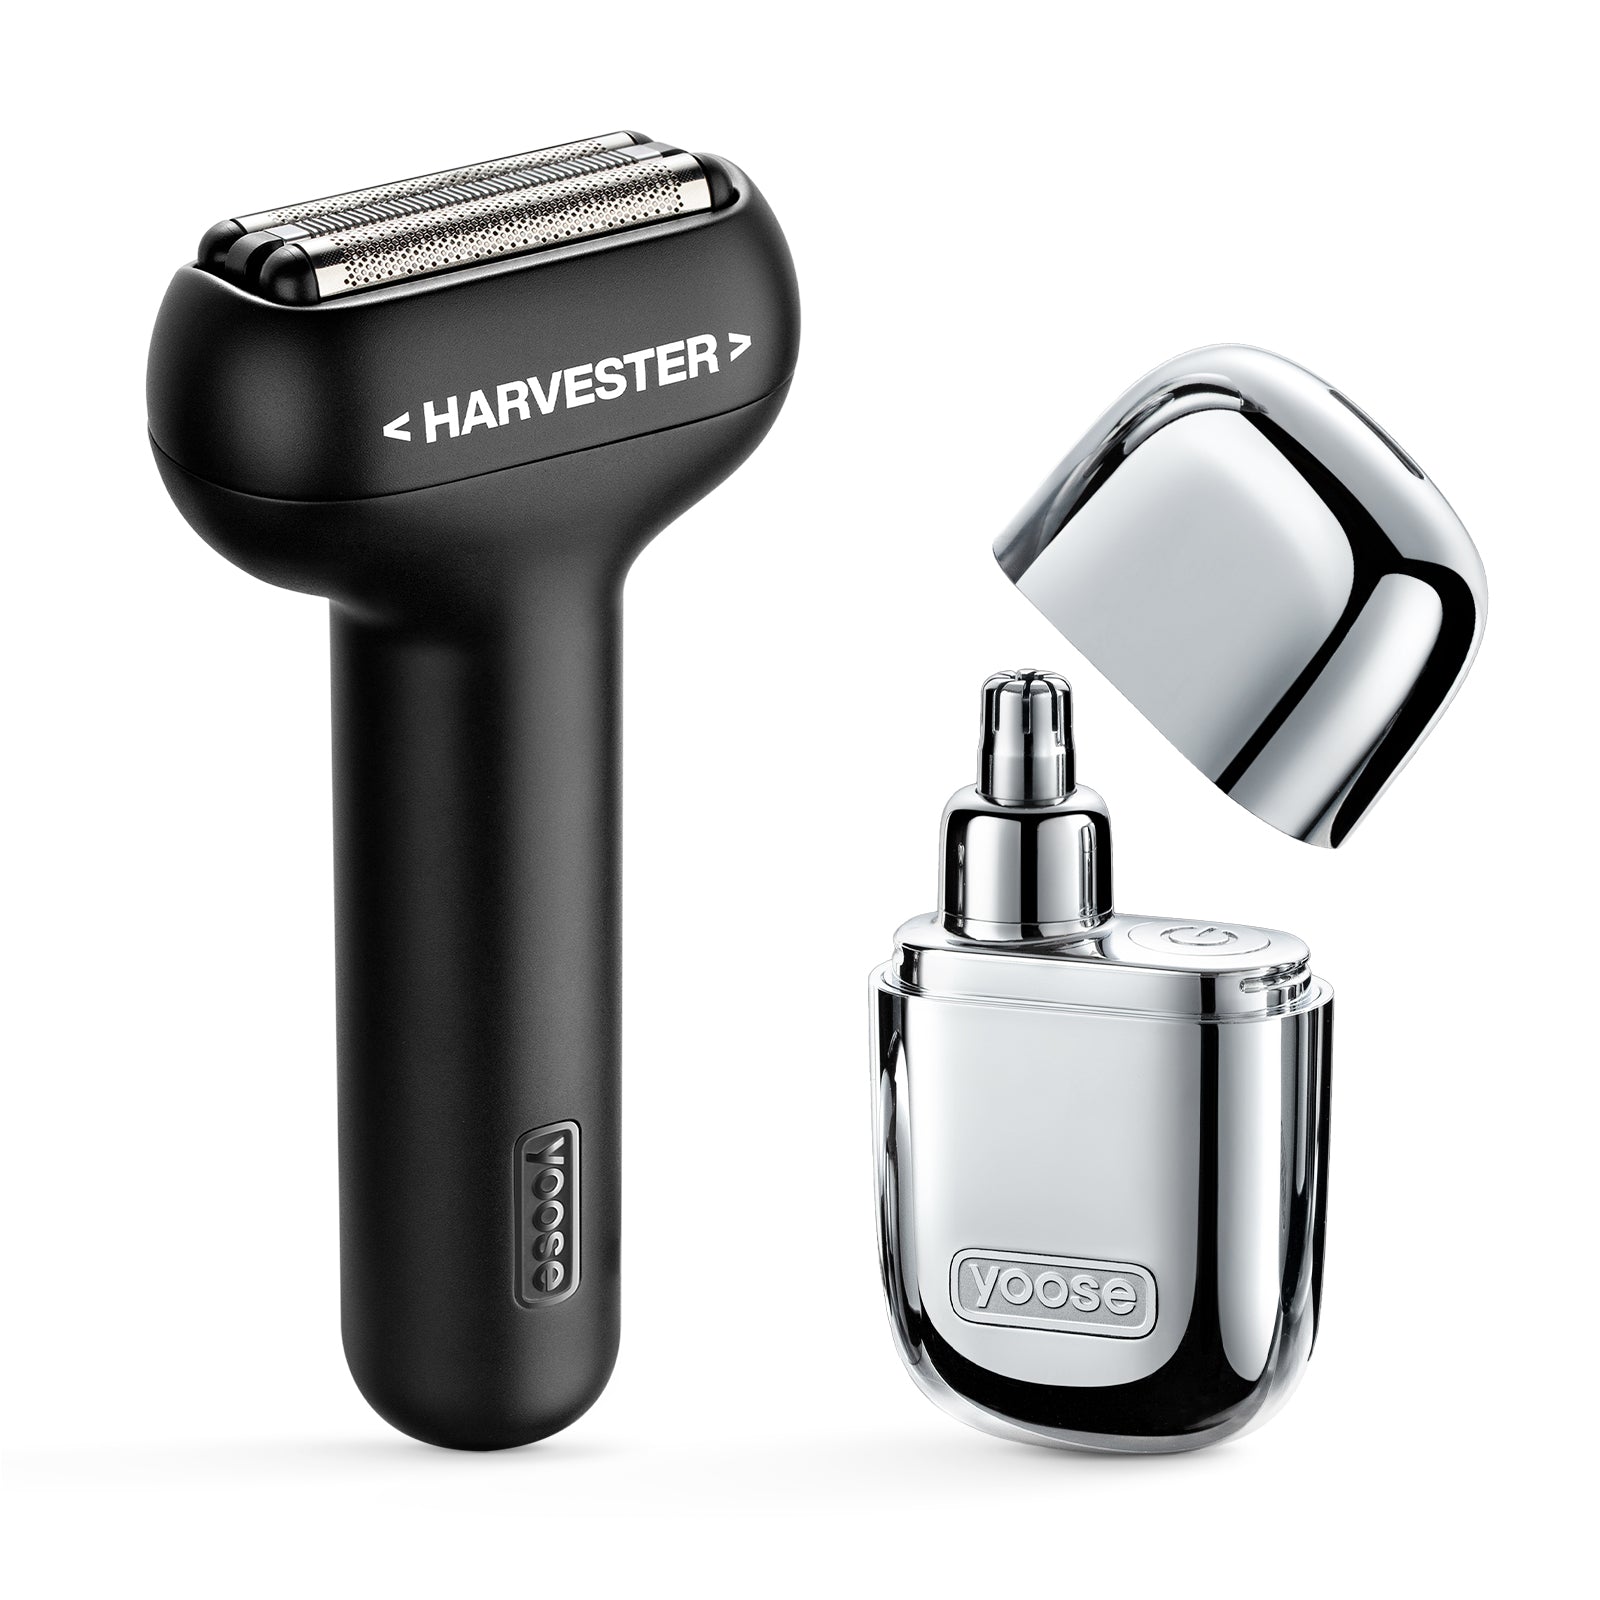 yoose Alloy Foil Shaver Cordless Travel Shaver with Leather Case + yoose Electric Nose Hair Trimmer